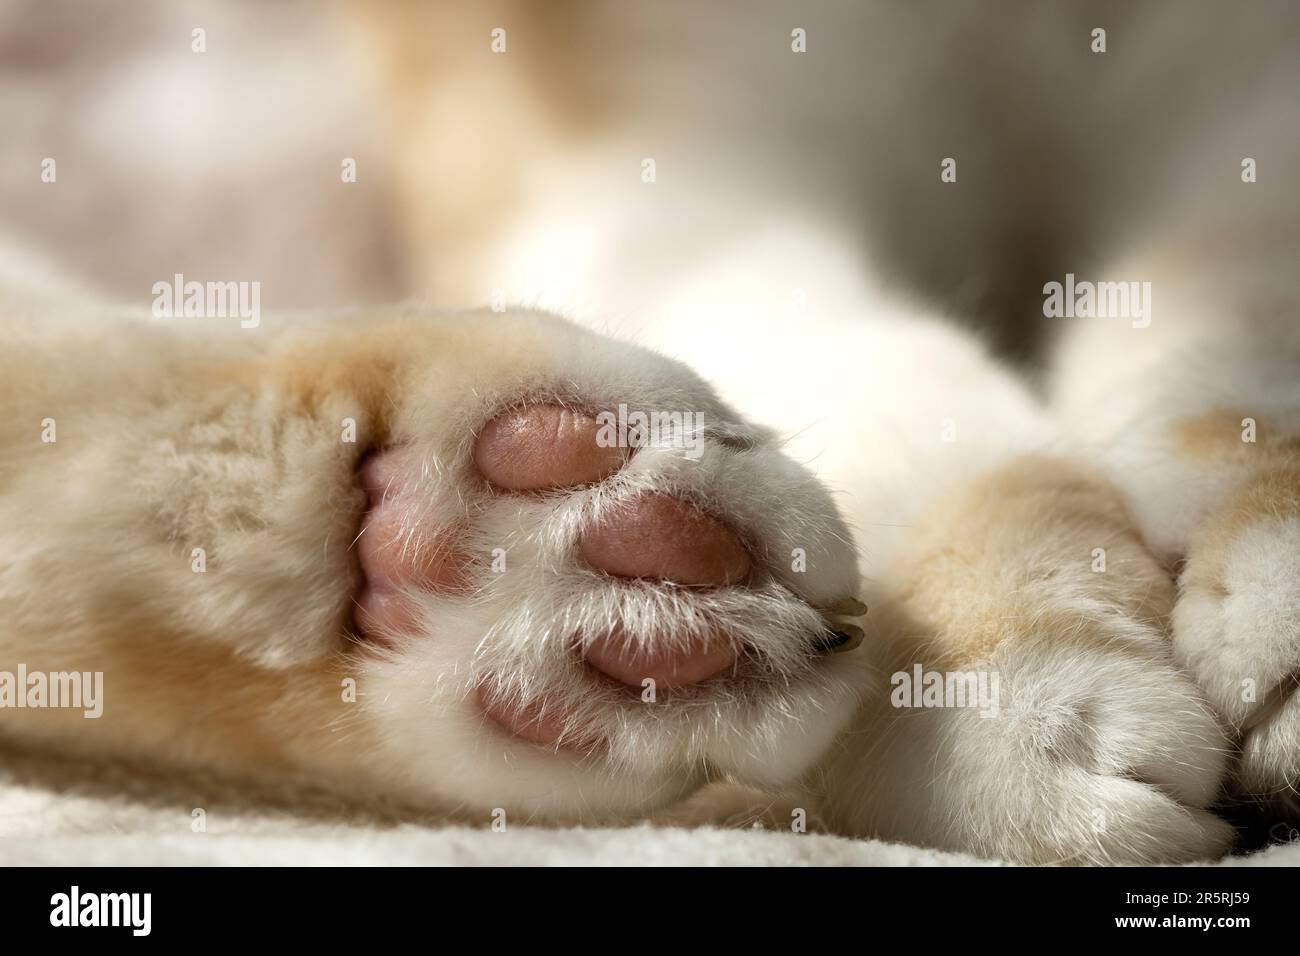 Gentle charming paws of a white cat with pink pads directed into the camera close-up Stock Photo